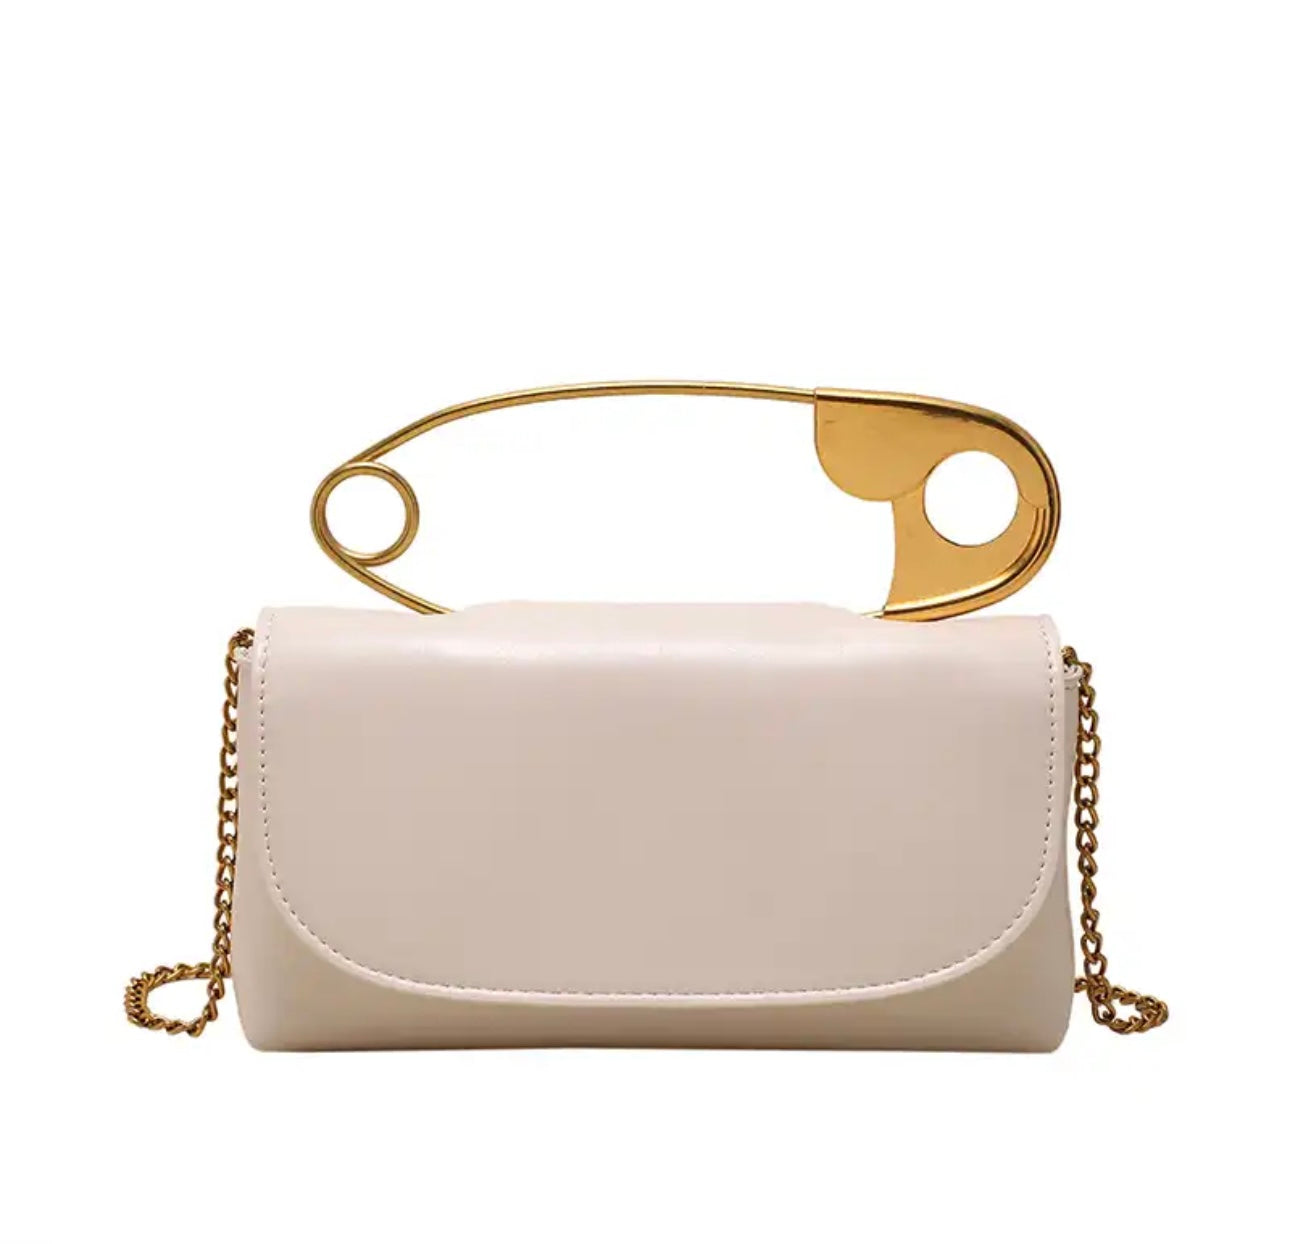 The Pin Handbag (Comes In Other Colors)